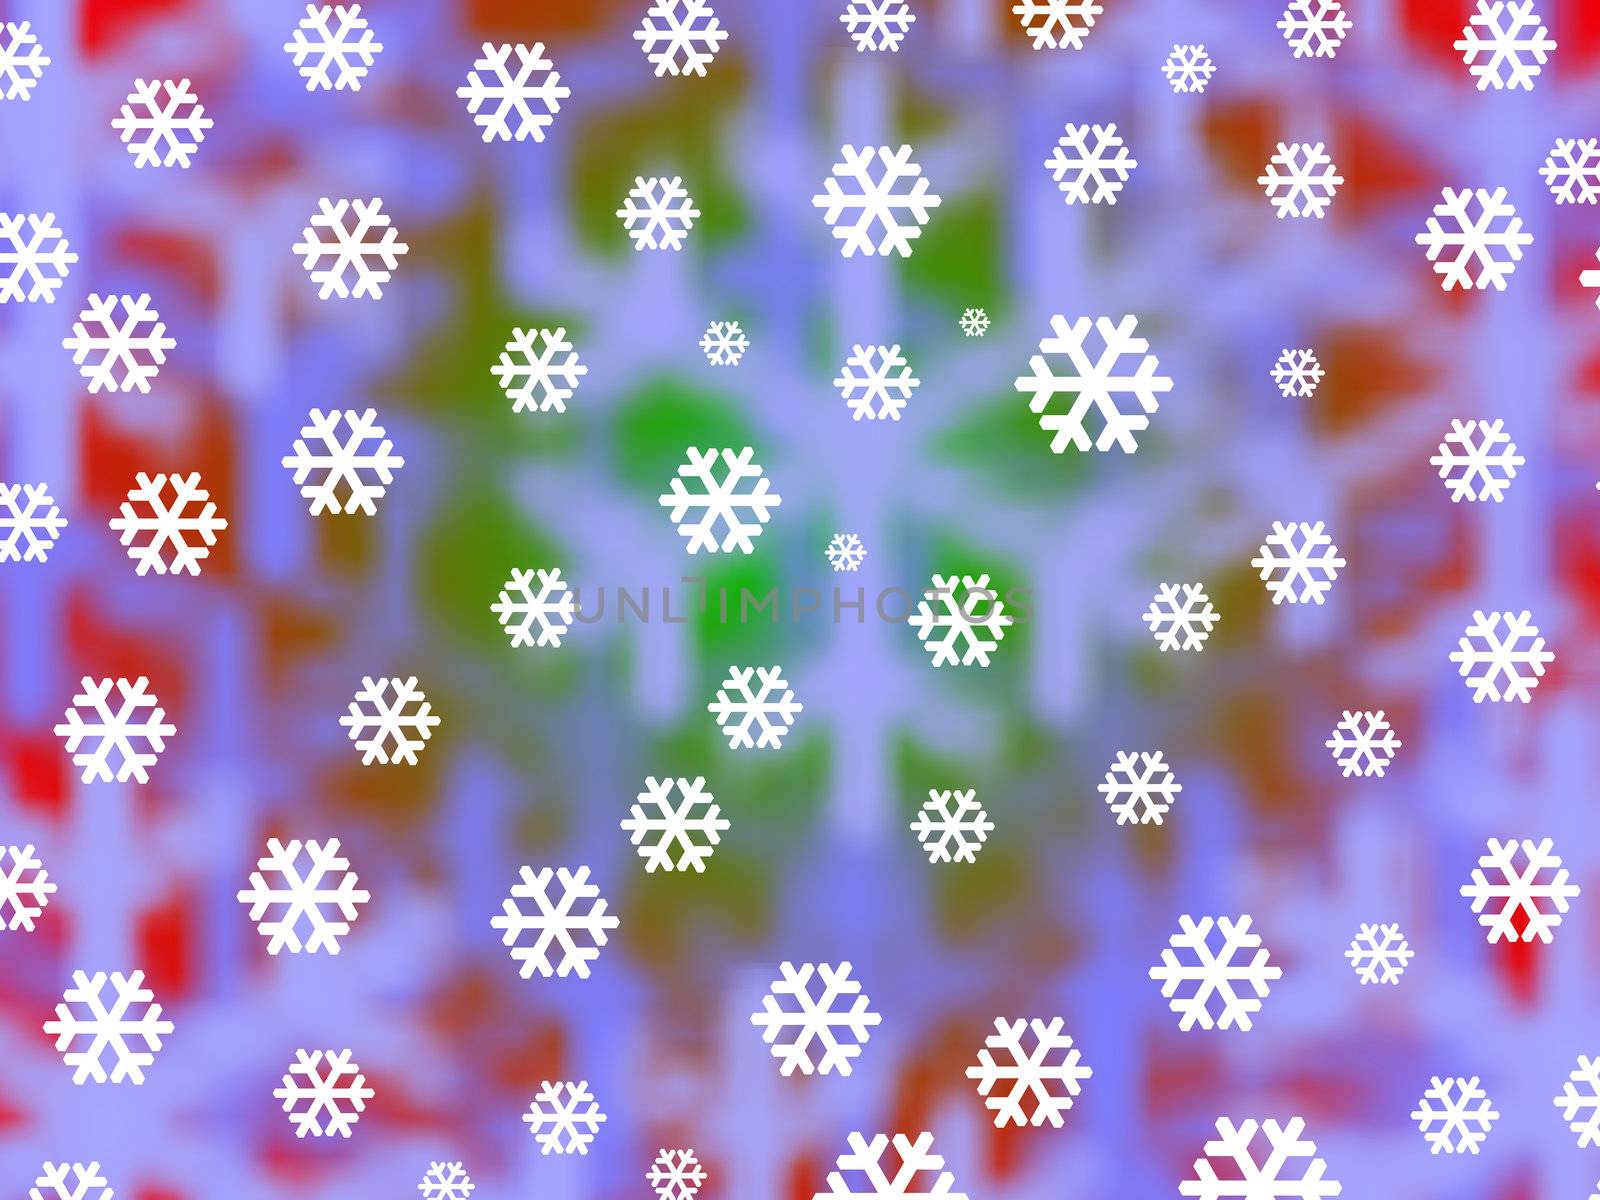 Bright snowflakes against a soft focus festive background